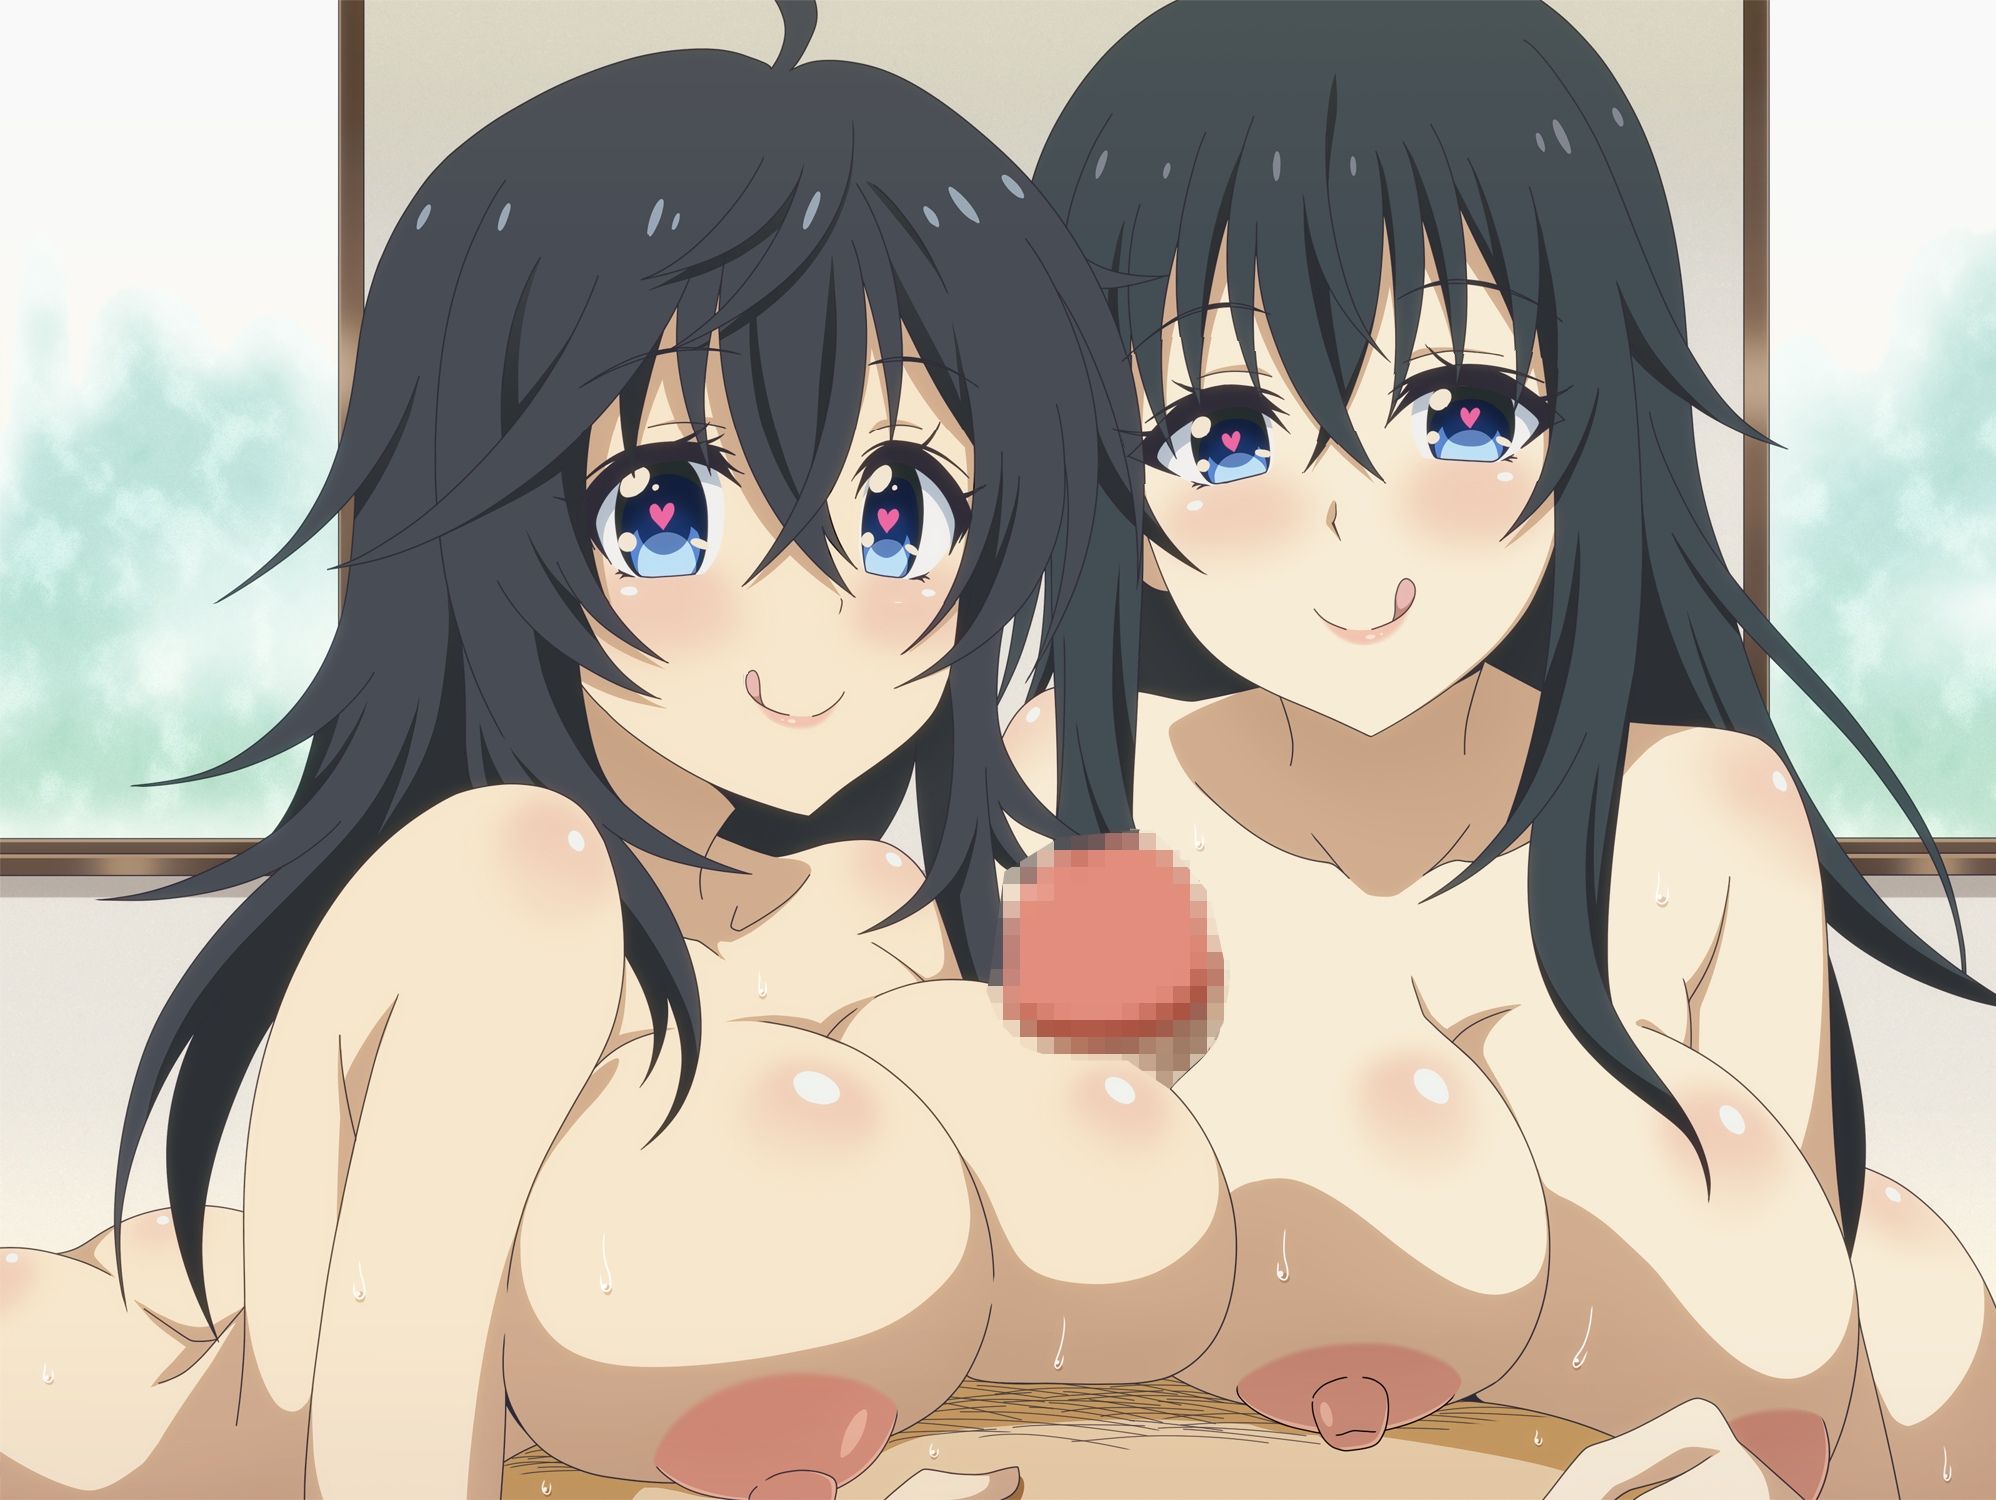 "Hey, Mommy, you're going to be broken daughter-chan ww" devil play secondary erotic image that is committed together mother and daughter, such as parent-child rice Bowl 16